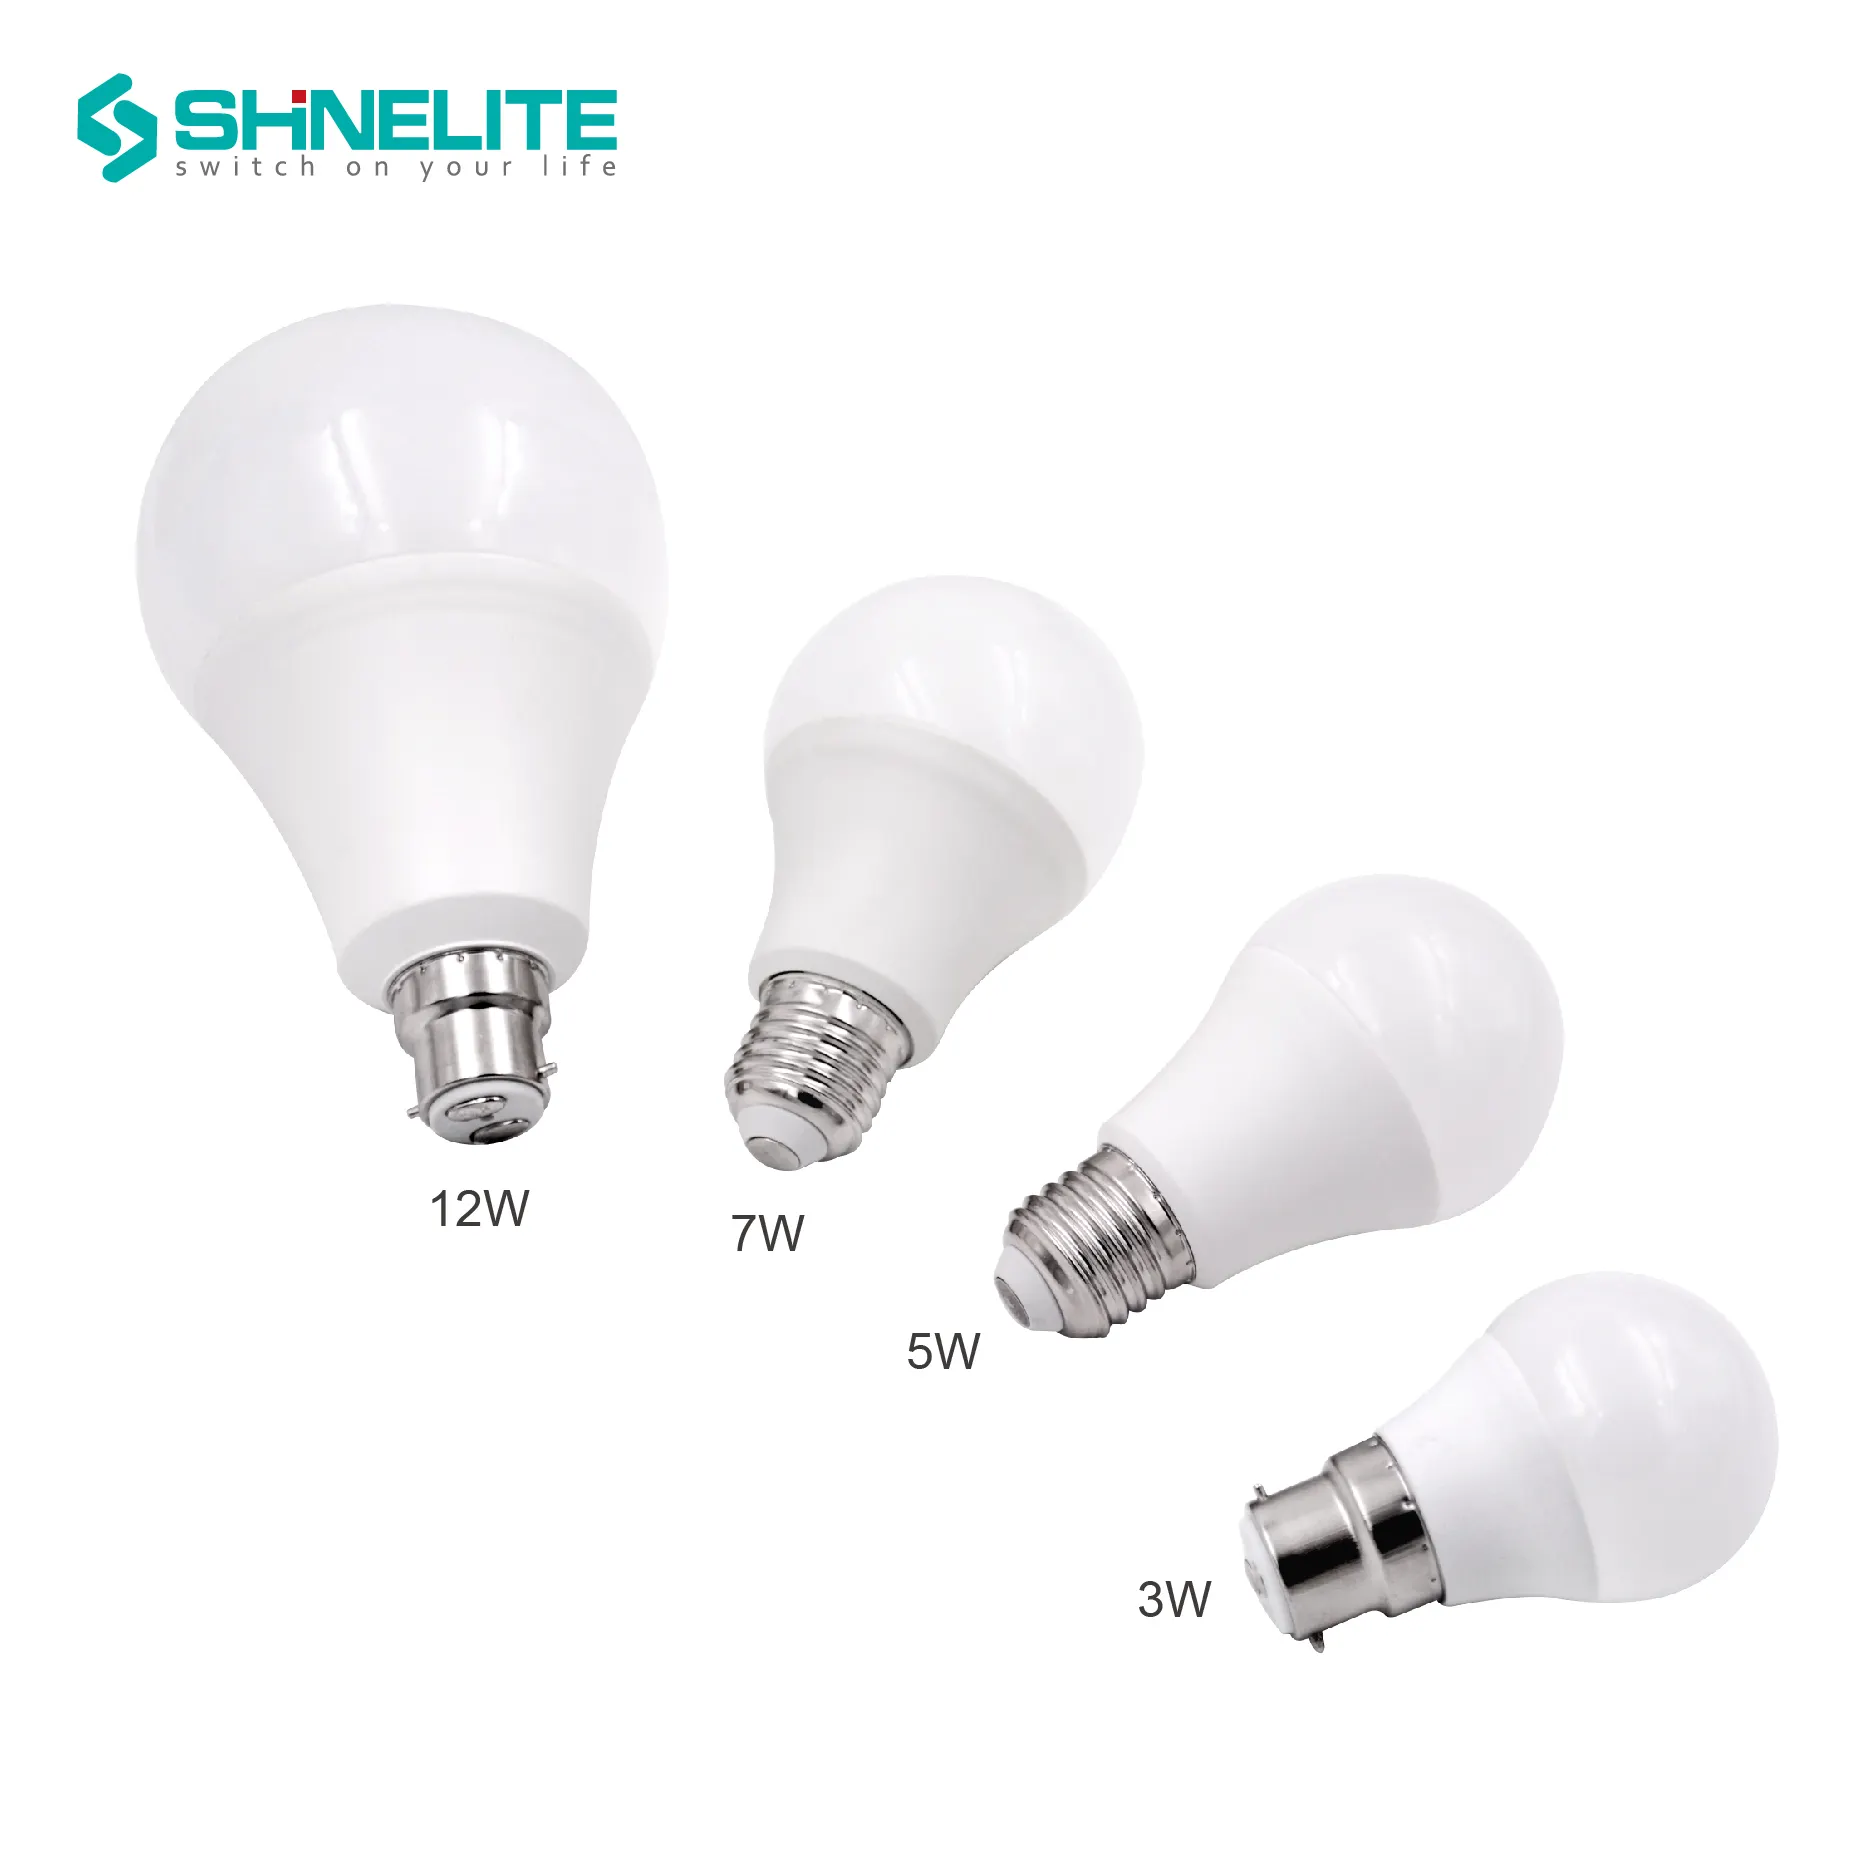 Environmental protection material lamp save energy 9w led light bulb